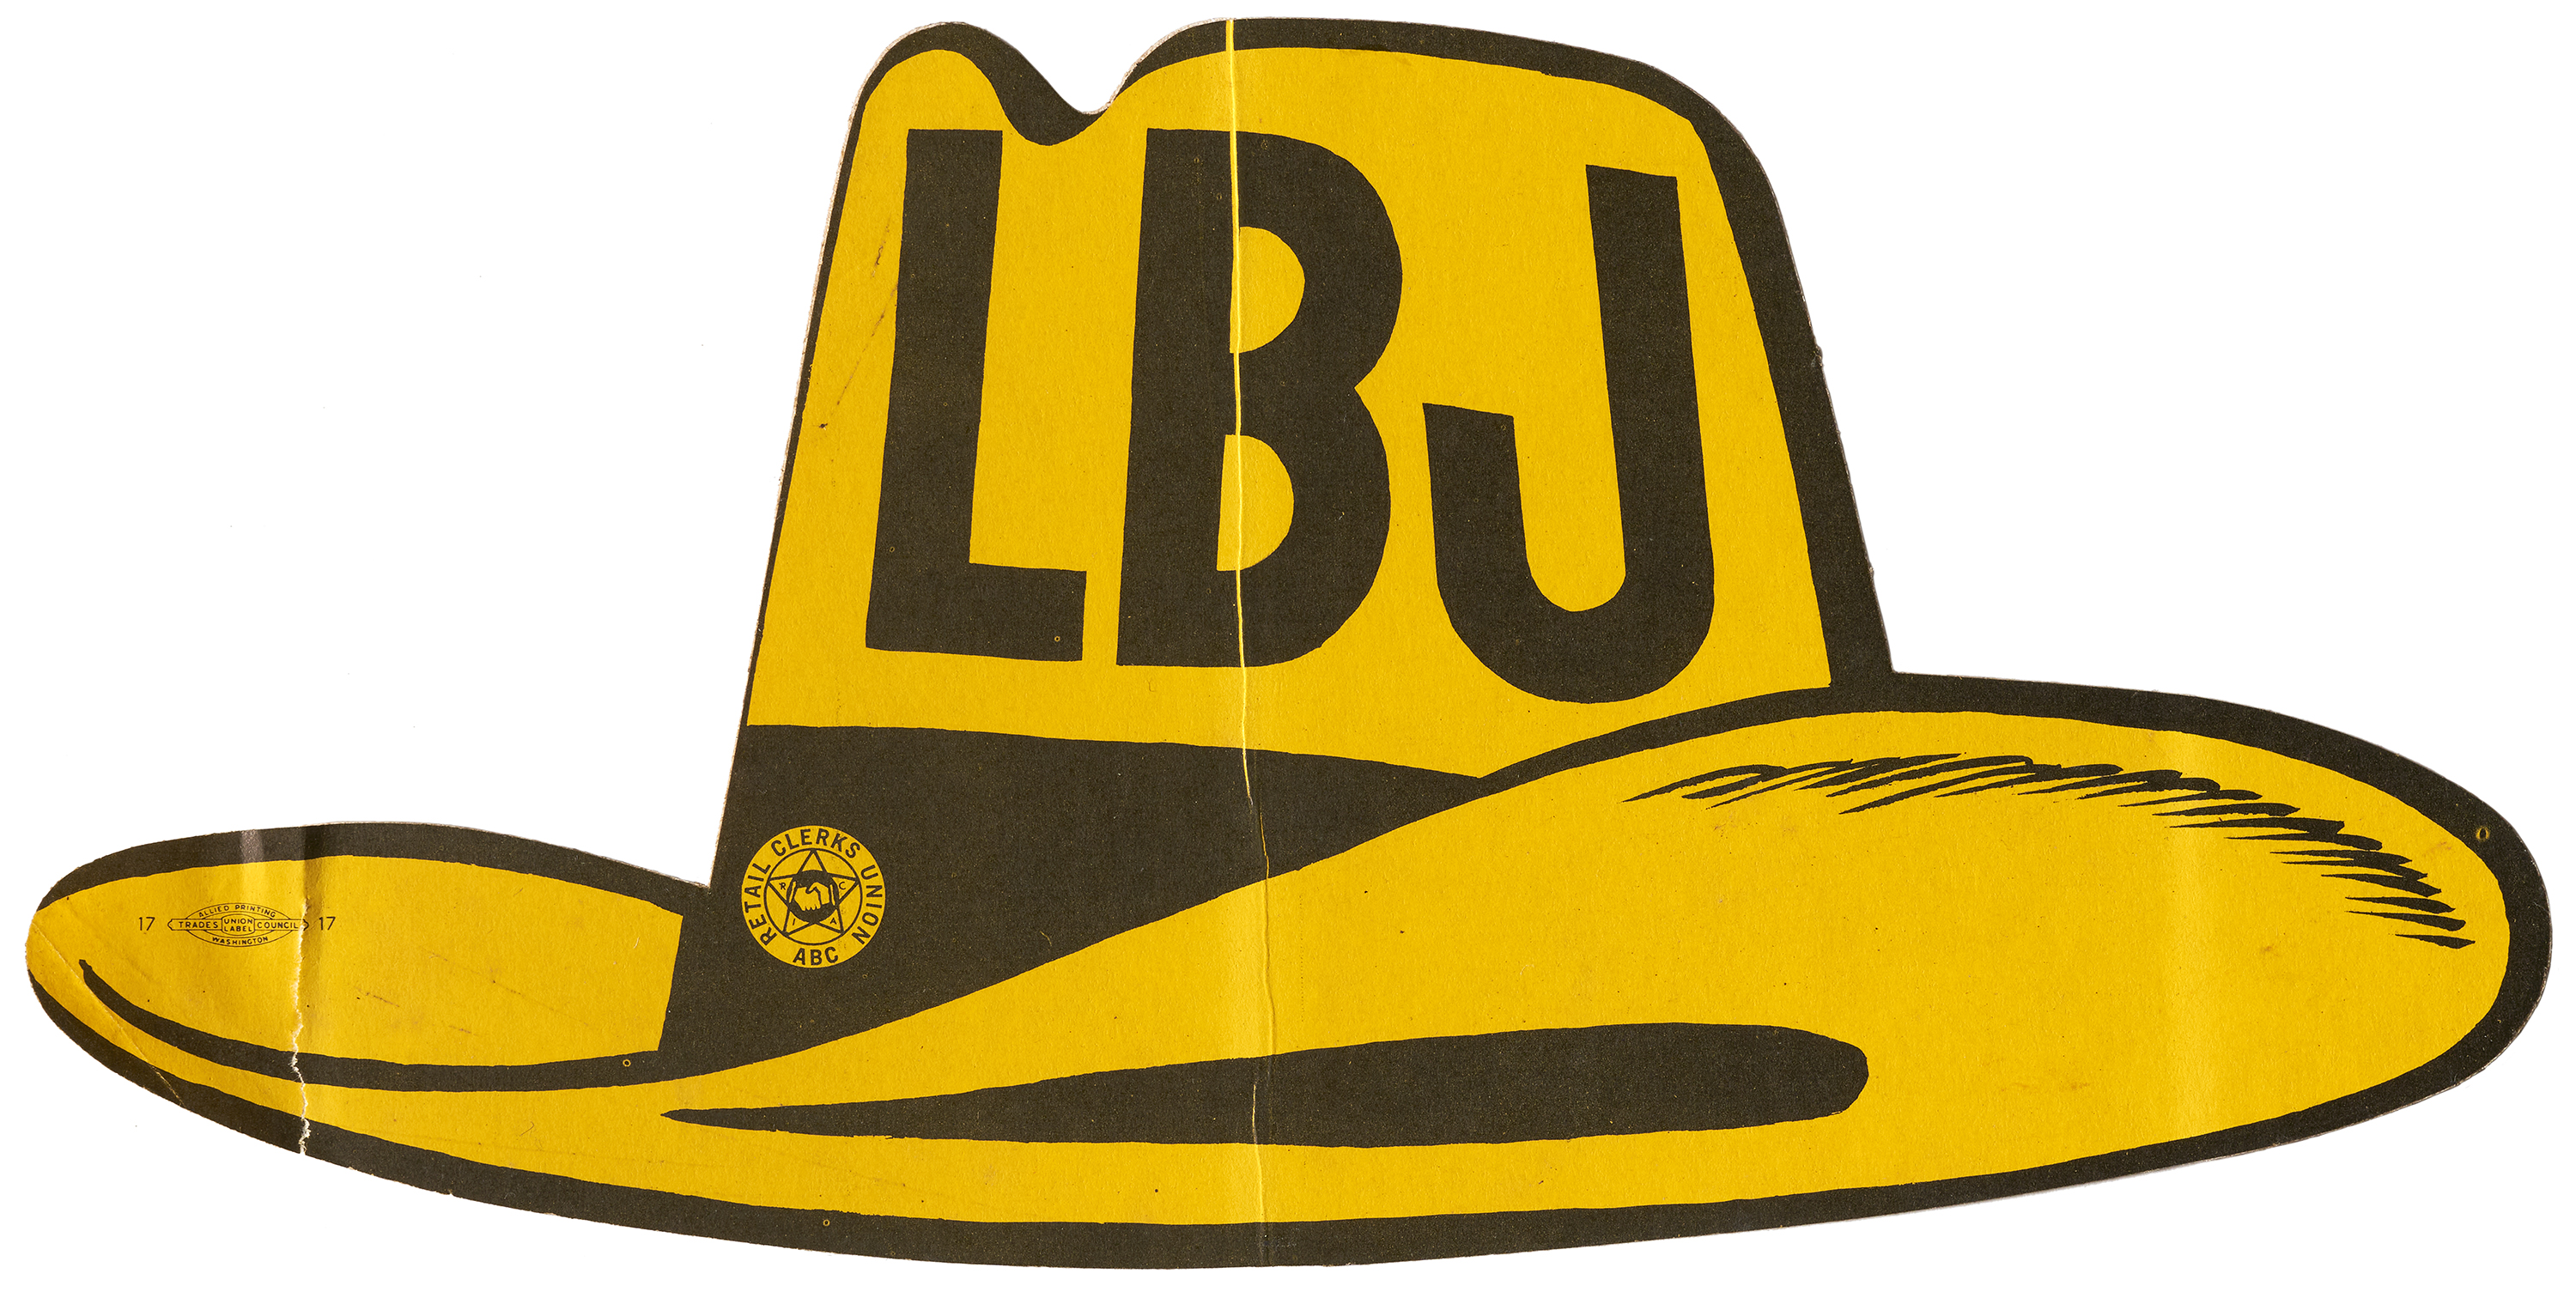 Sticker for Lyndon B. Johnson’s 1964 U.S. presidential campaign, featuring trademarks for retail clerks and printing unions, United States, 1964